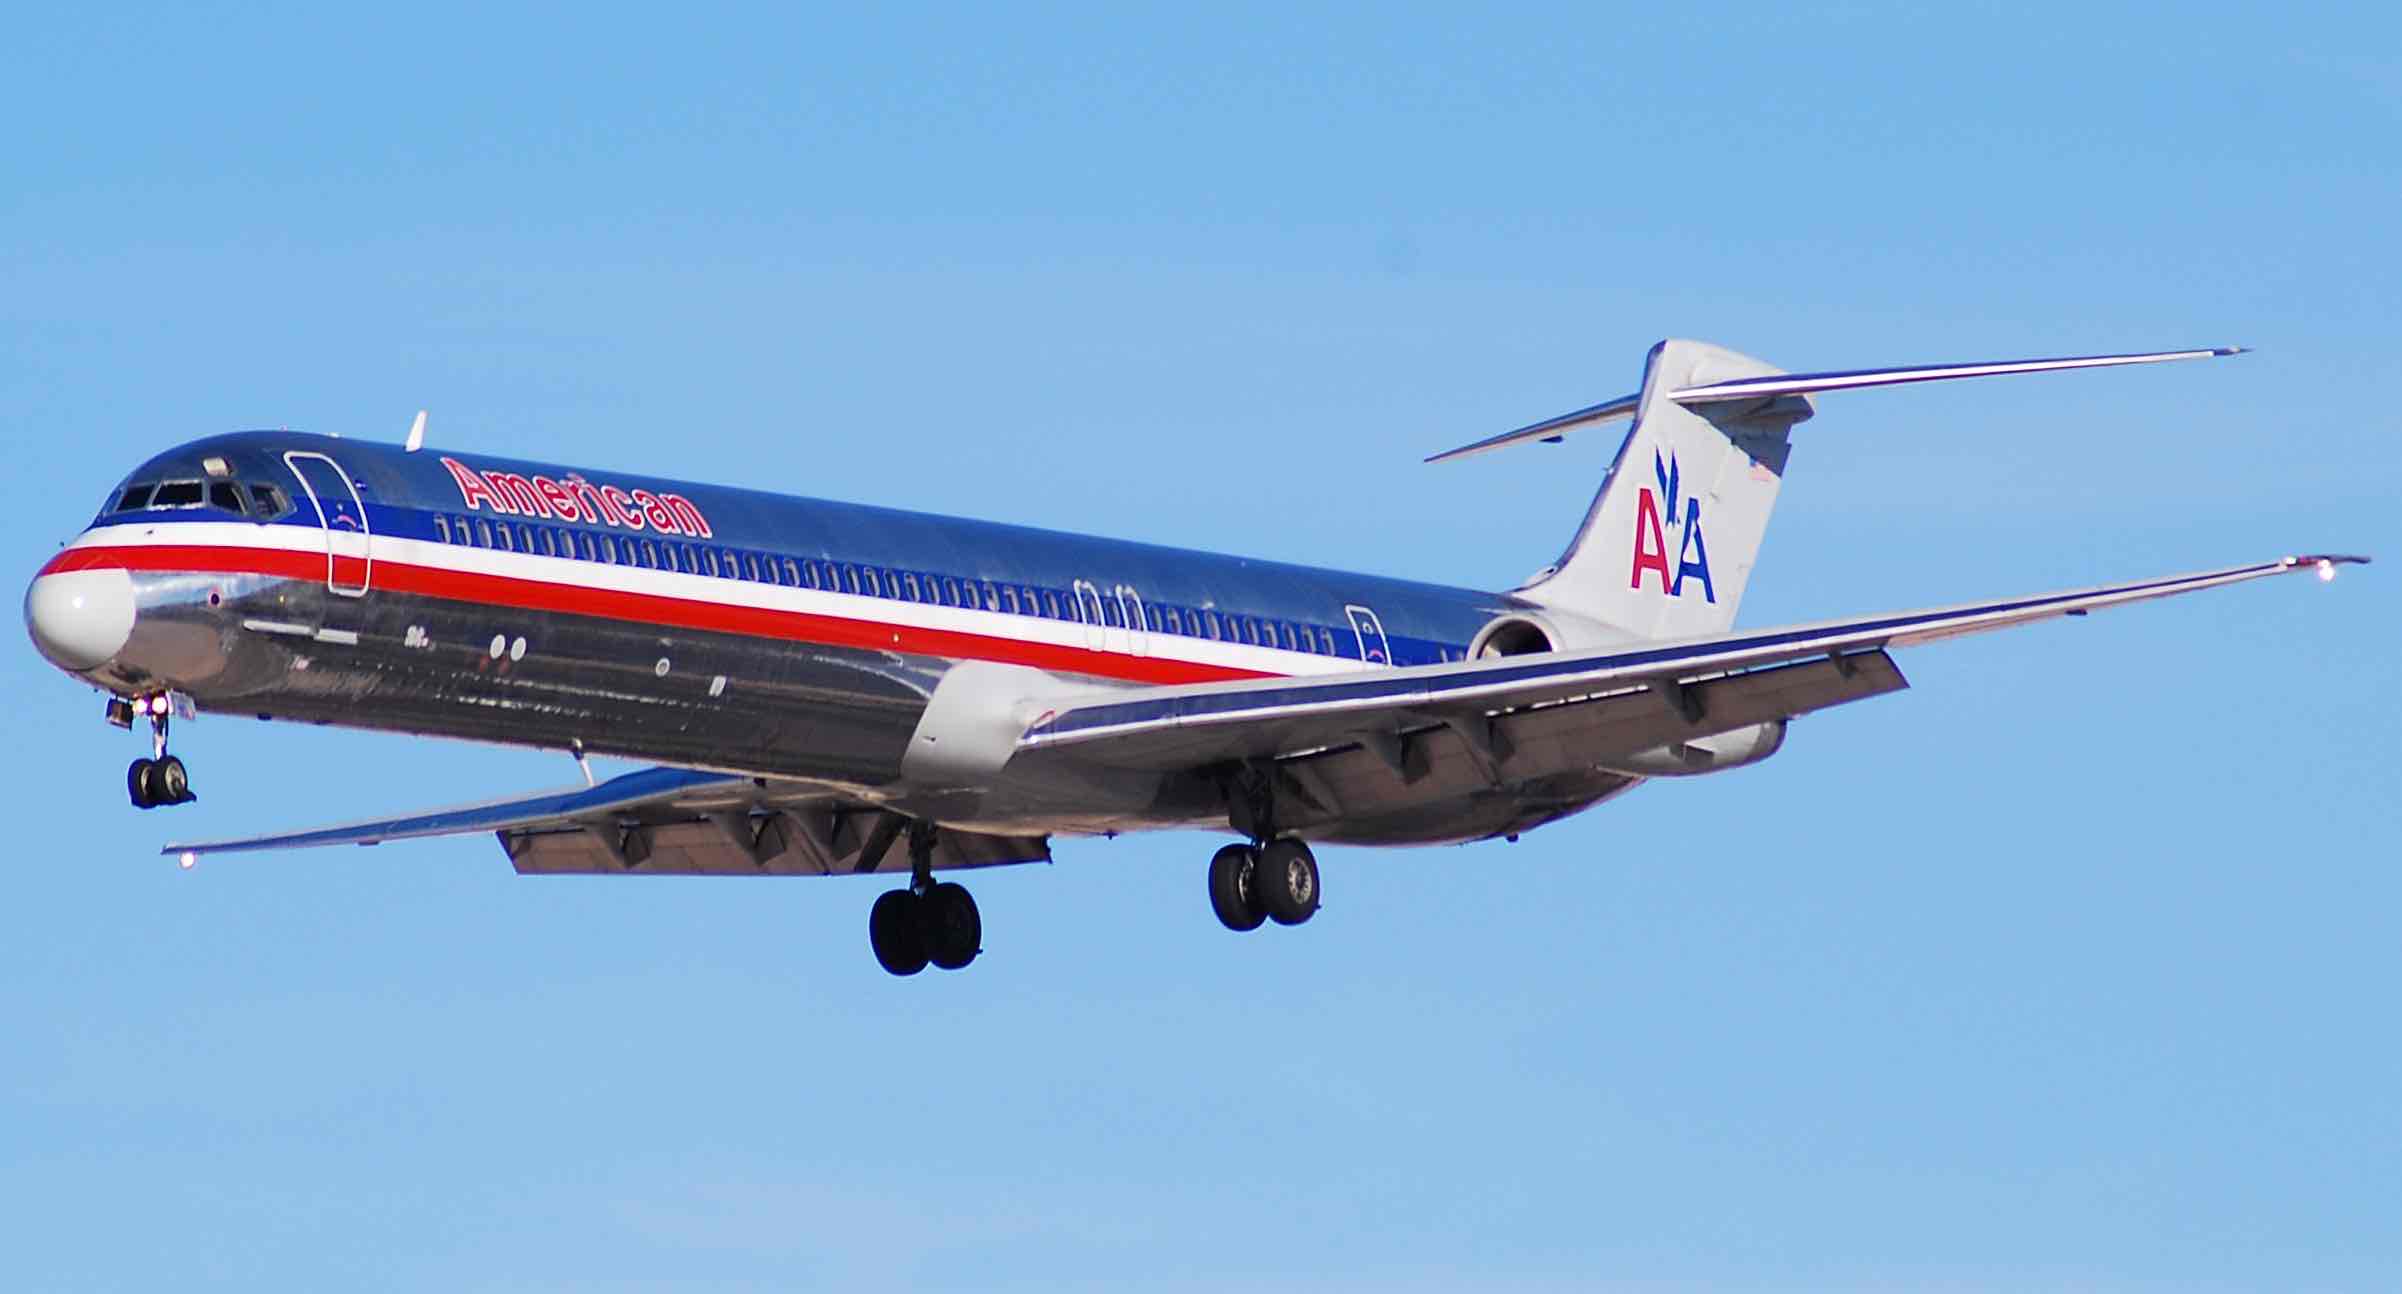 American Airlines pensionerer MD-80 fly - Danmark